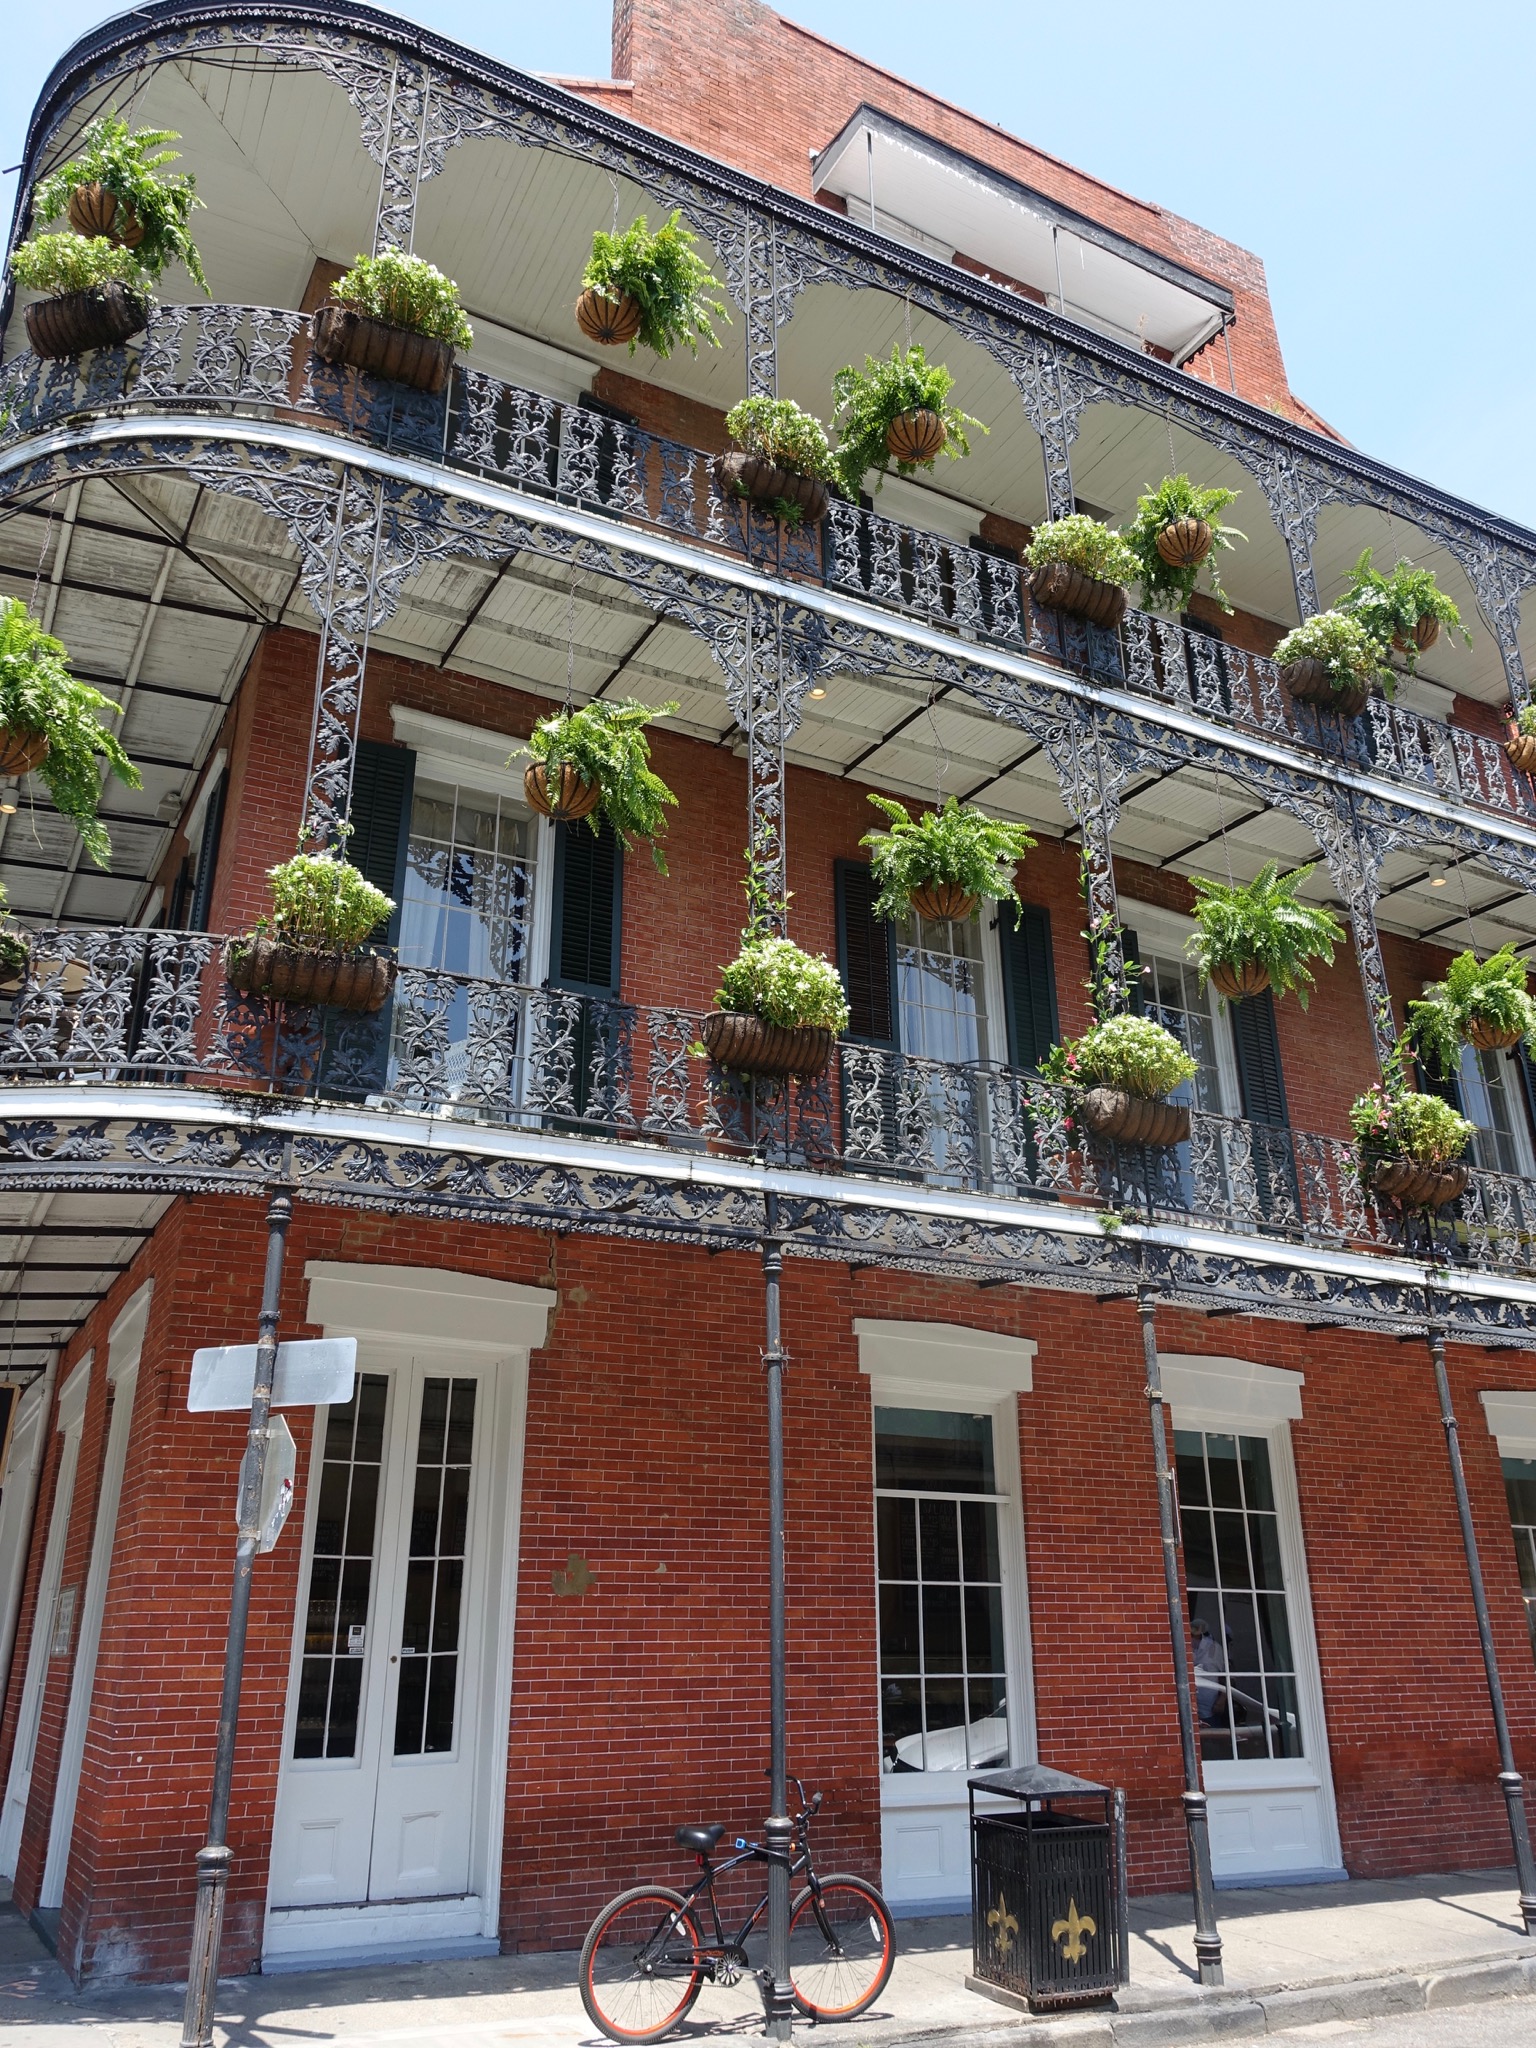 Photo 12 of 56 from the album Highlights New Orleans 2015.